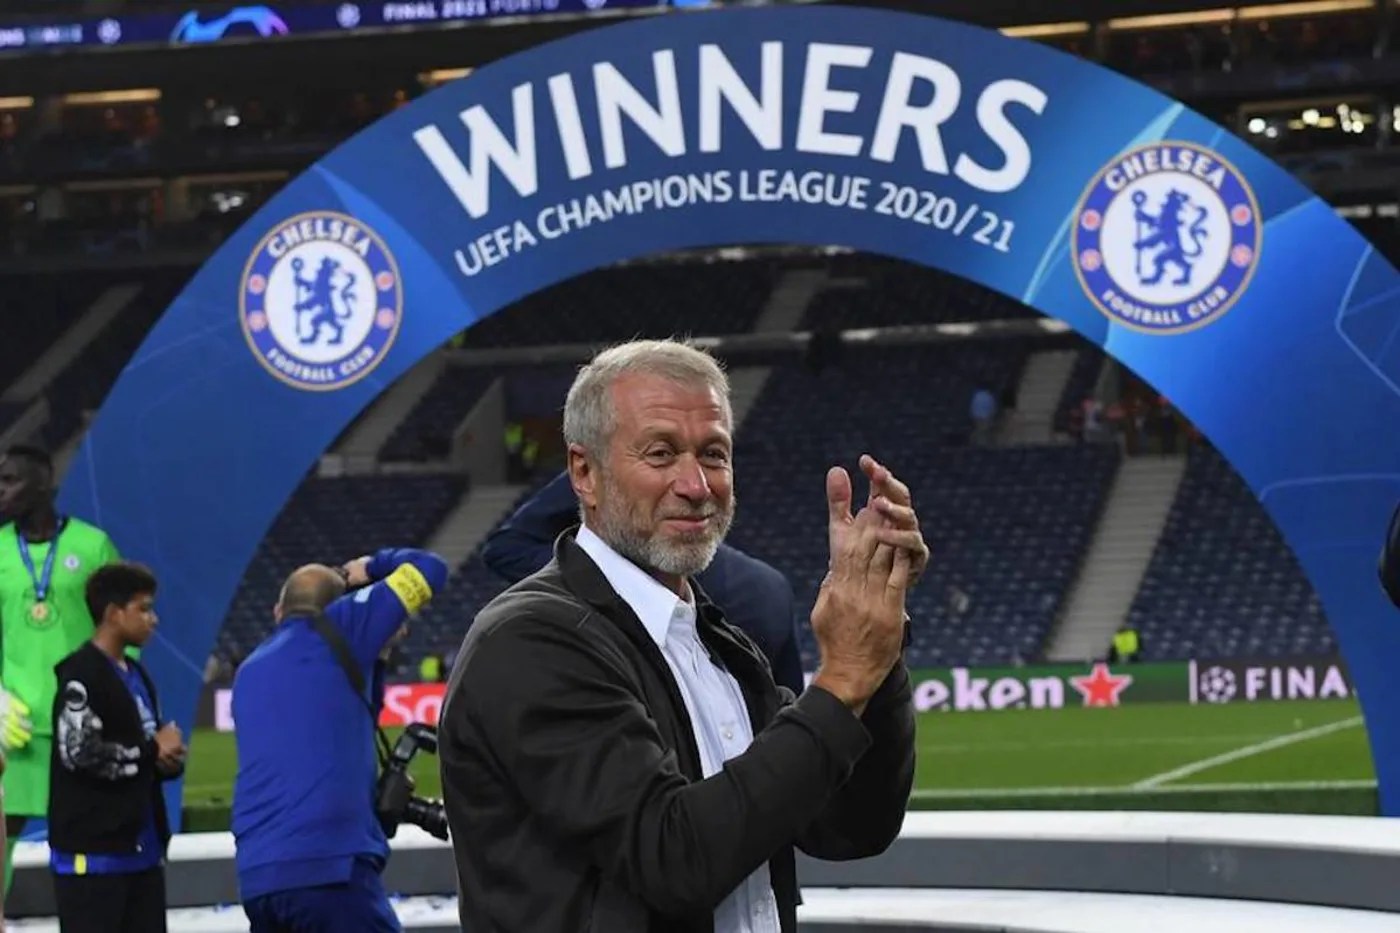 Chelsea New Owner: Roman Abramovich clarifies latest TAKEOVER reports, shares an OFFICIAL STATEMENT on the sale of the club - Check out Full Statement